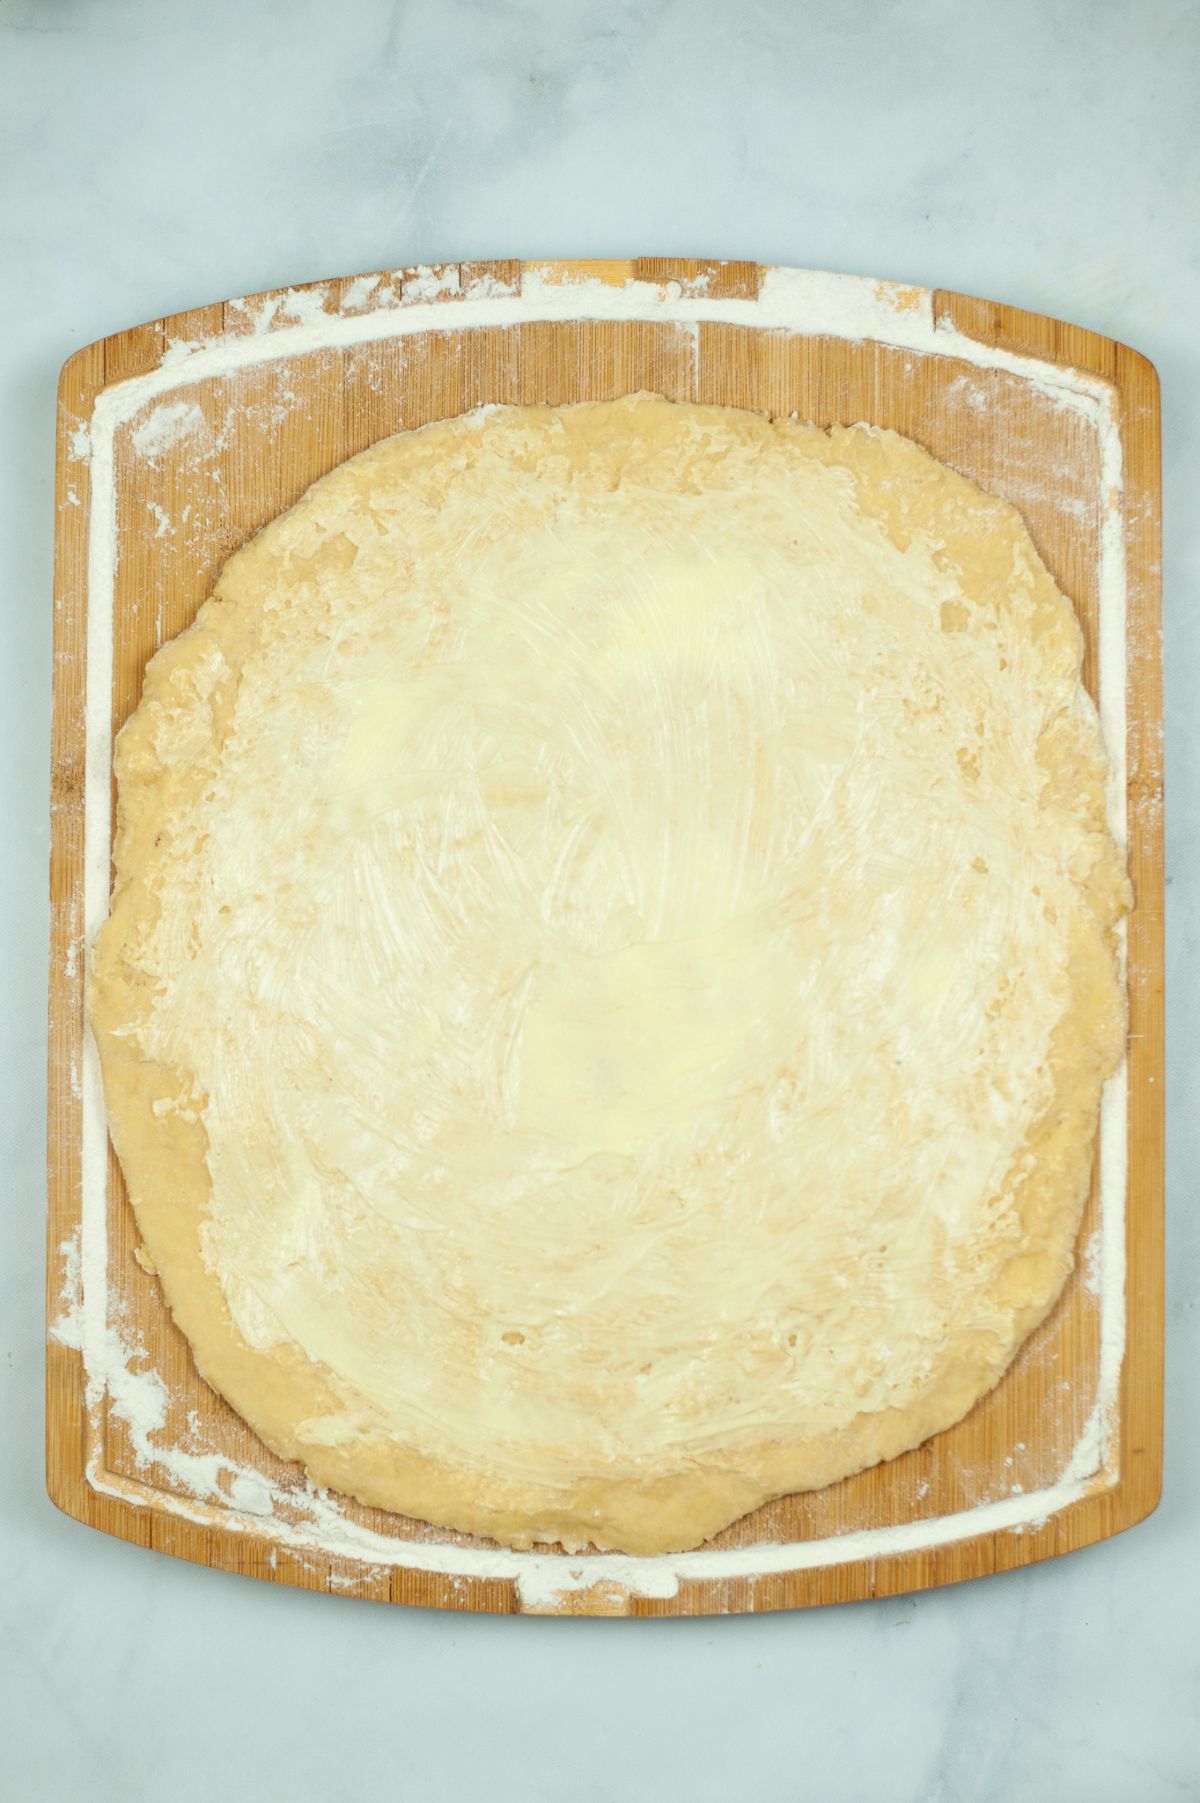 flattened dough spread with butter, on a wooden board